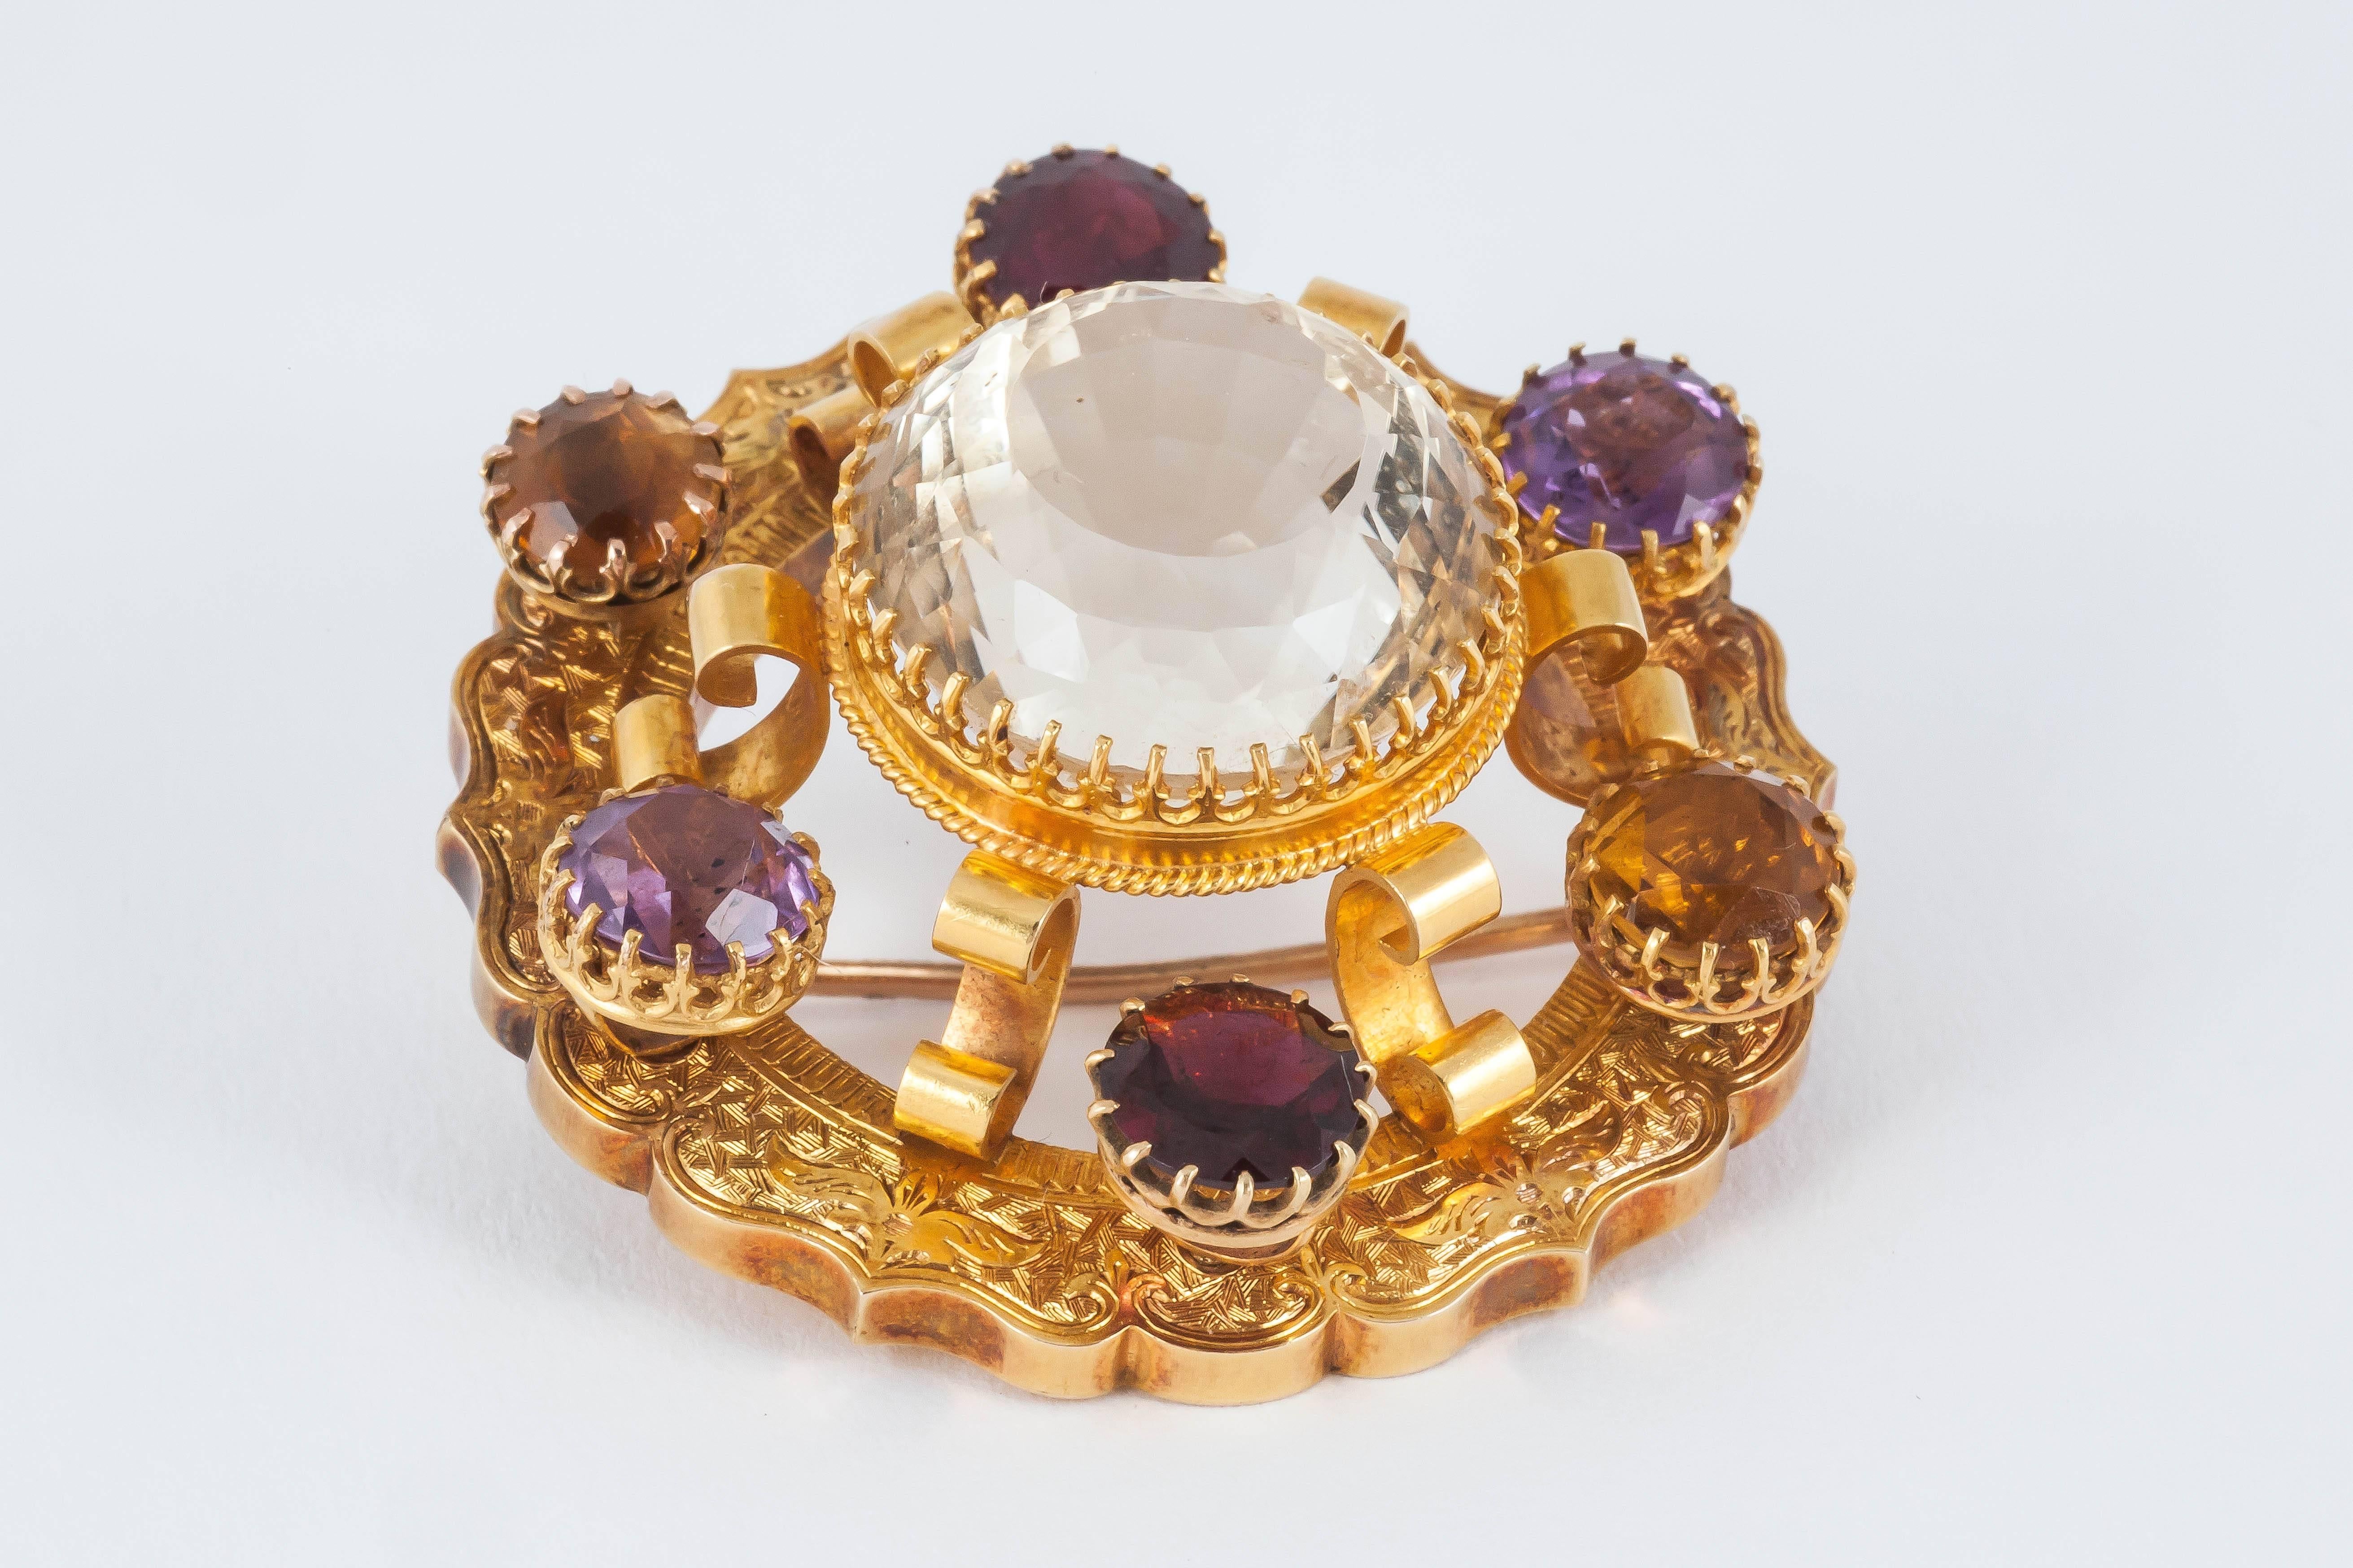 A Victorian finely engraved 15 carat yellow gold antique brooch set with coloured semi precious gemstones comprising amethysts, garnets and a large central Cairngorm citrine. In excellent condition.
Measures 42mm across.
Antique piece (over 100